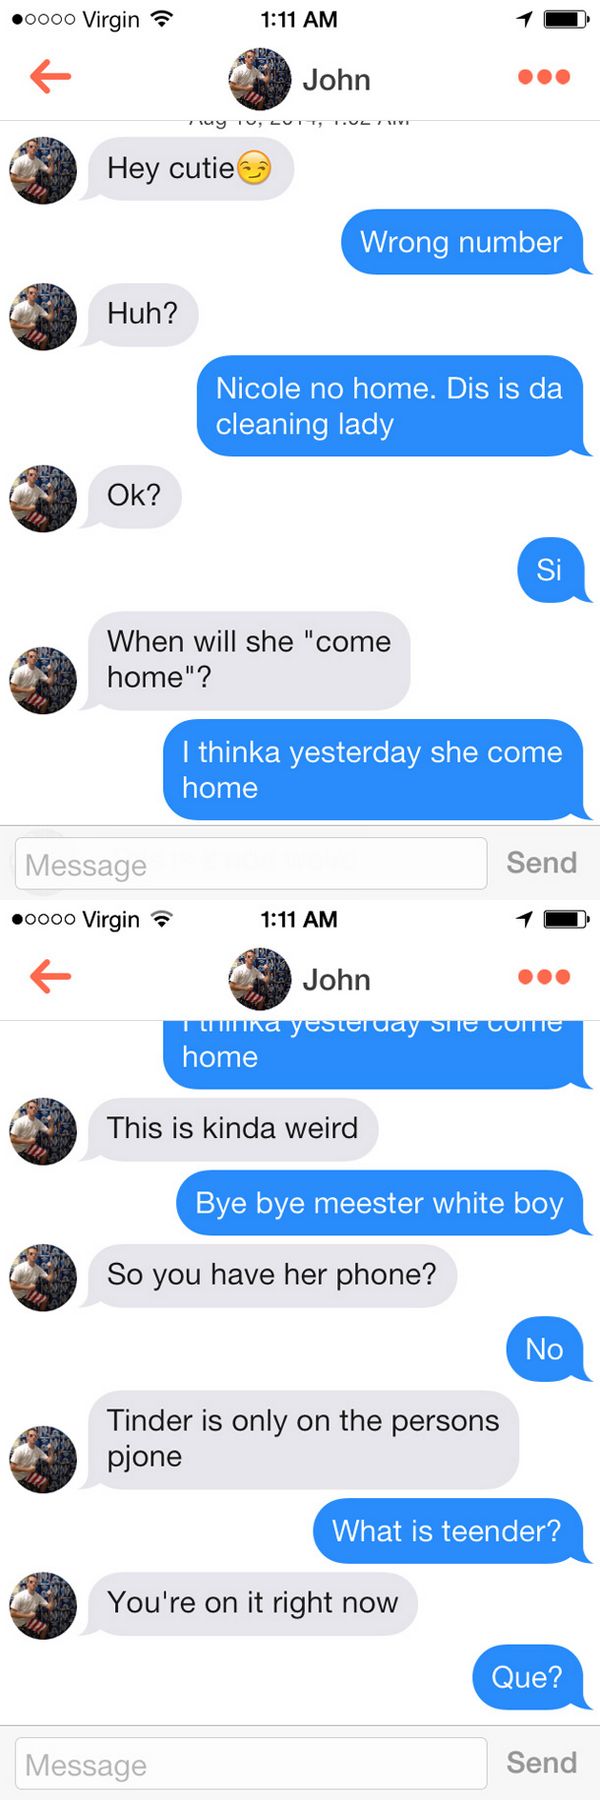 funny tinder texts - 0000 Virgin John Hey cutie Wrong number Huh? Nicole no home. Dis is da cleaning lady Ok? When will she "come home"? I thinka yesterday she come home Message Send 0000 Virgin John Ili na yesteruay Site Cotte home This is kinda weird By